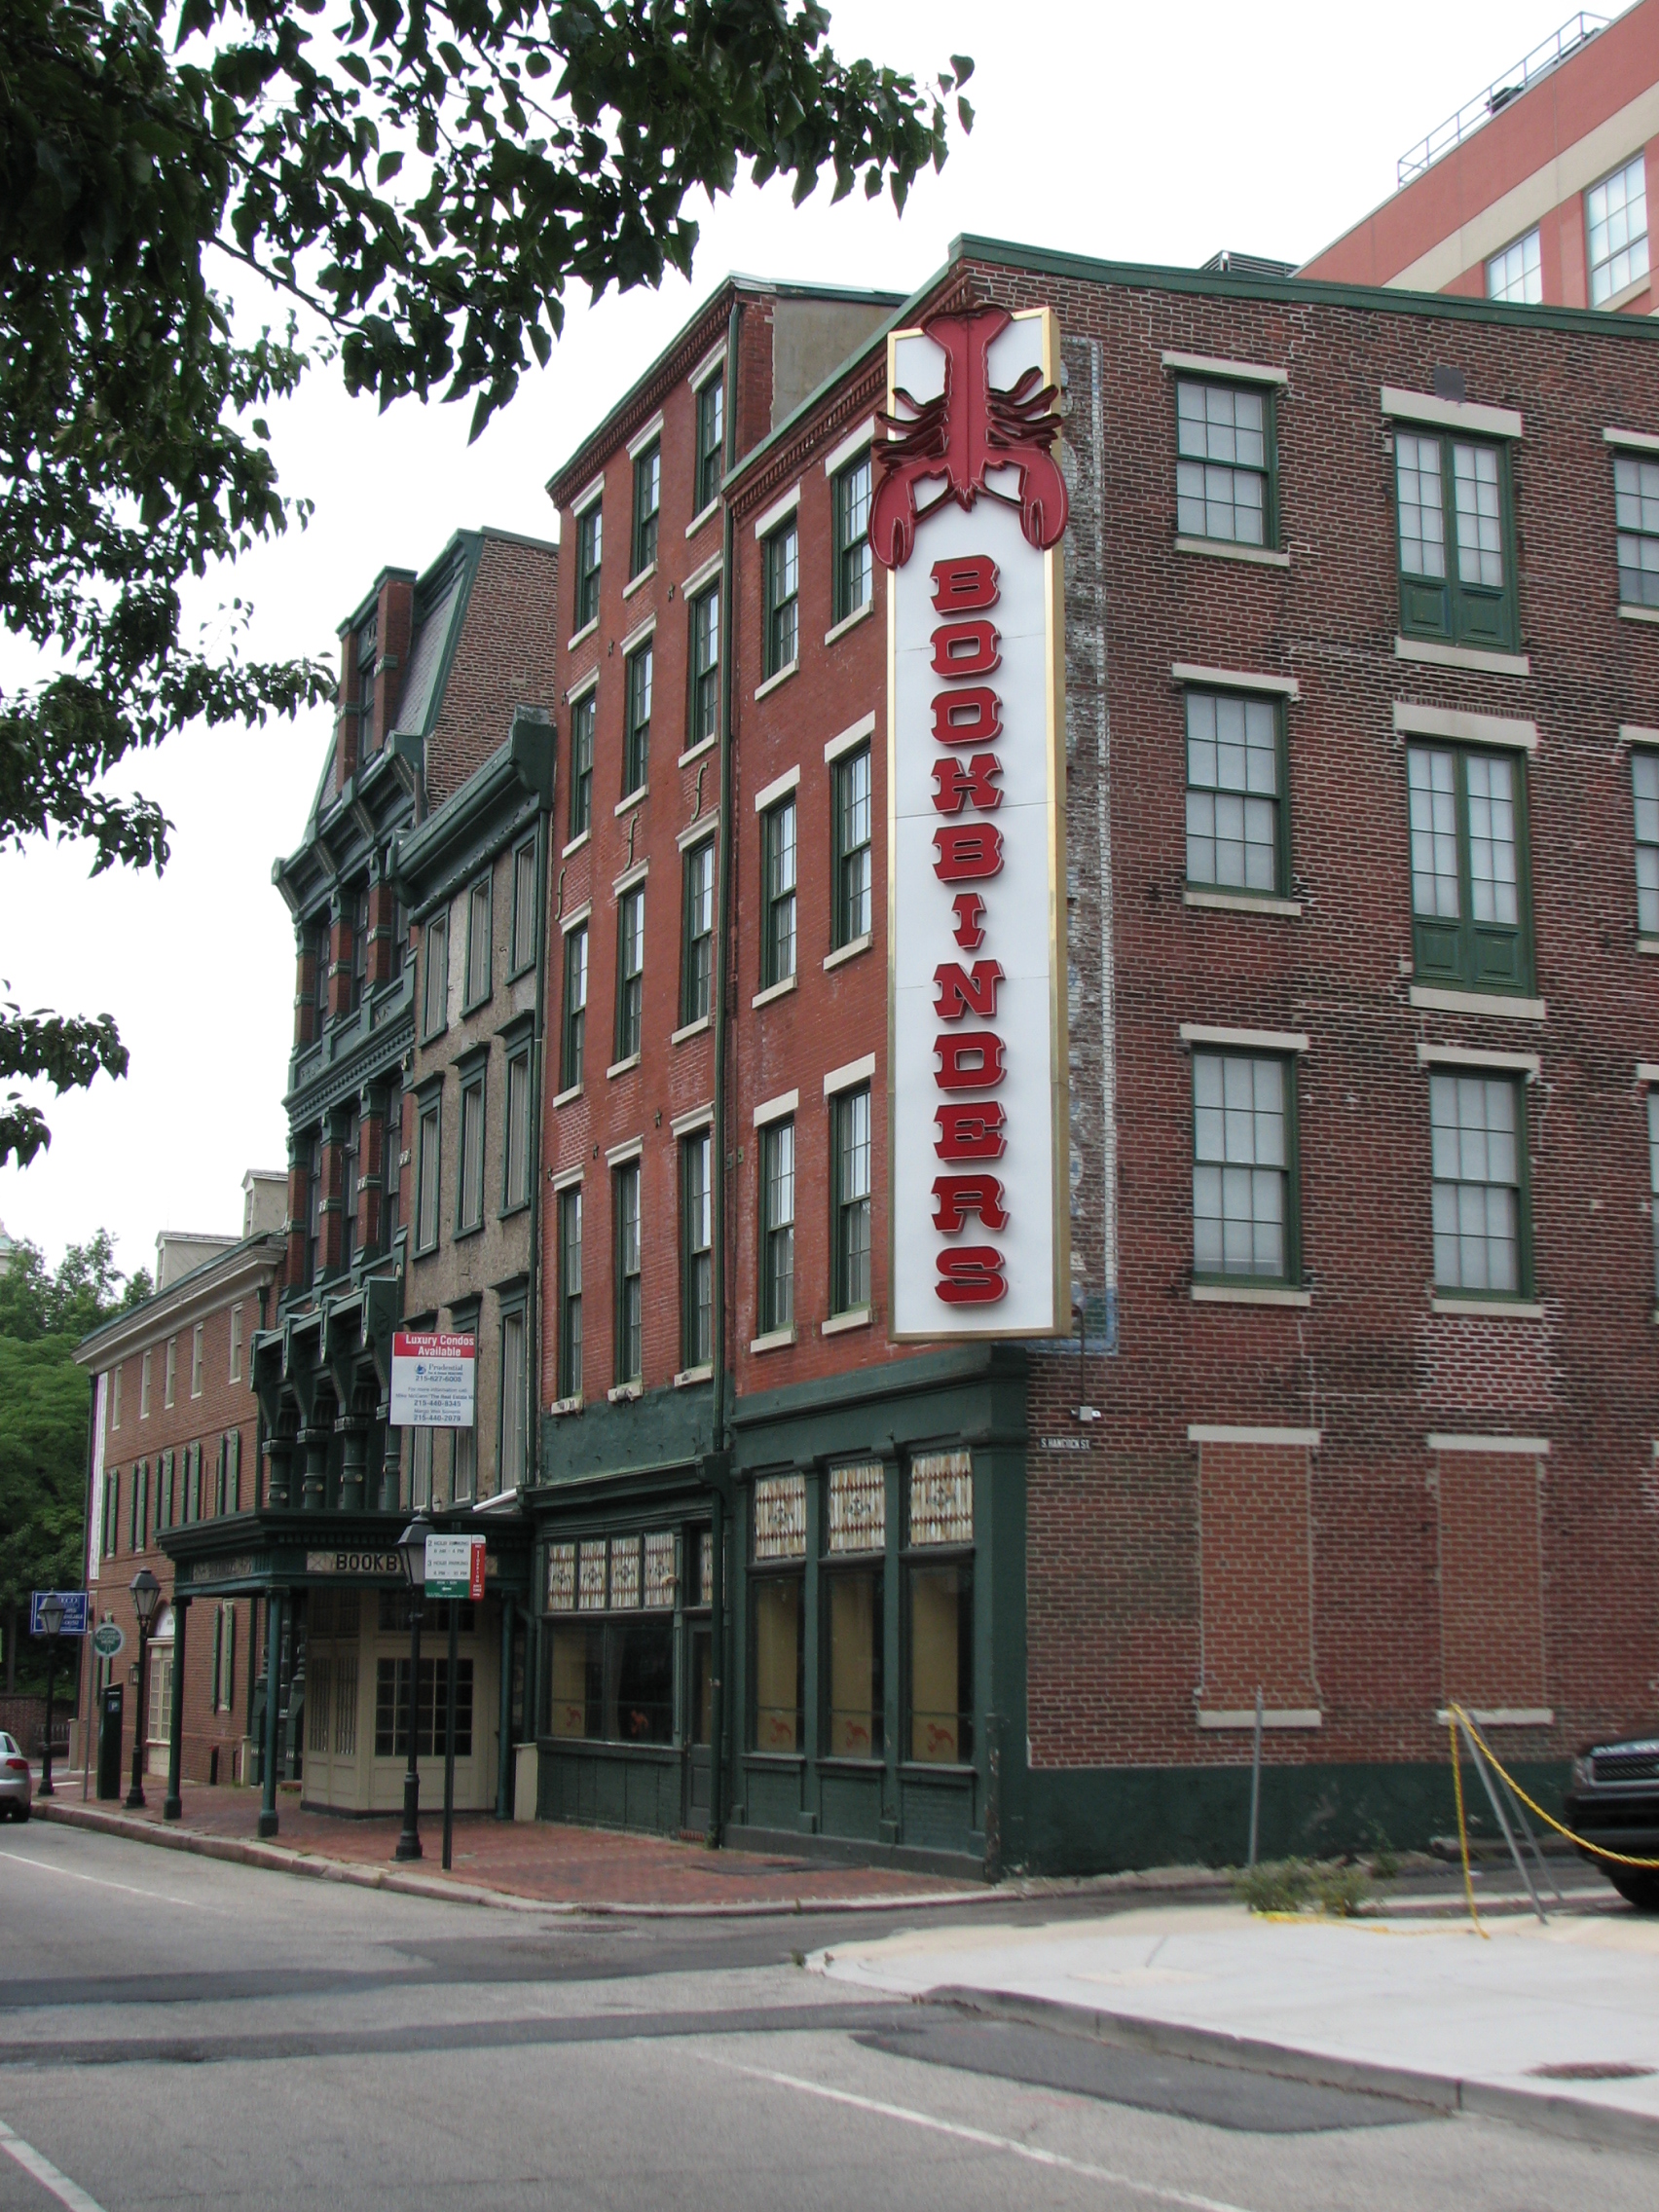 The former seafood restaurant occupied five buildings from 121 to 135 Walnut Street.